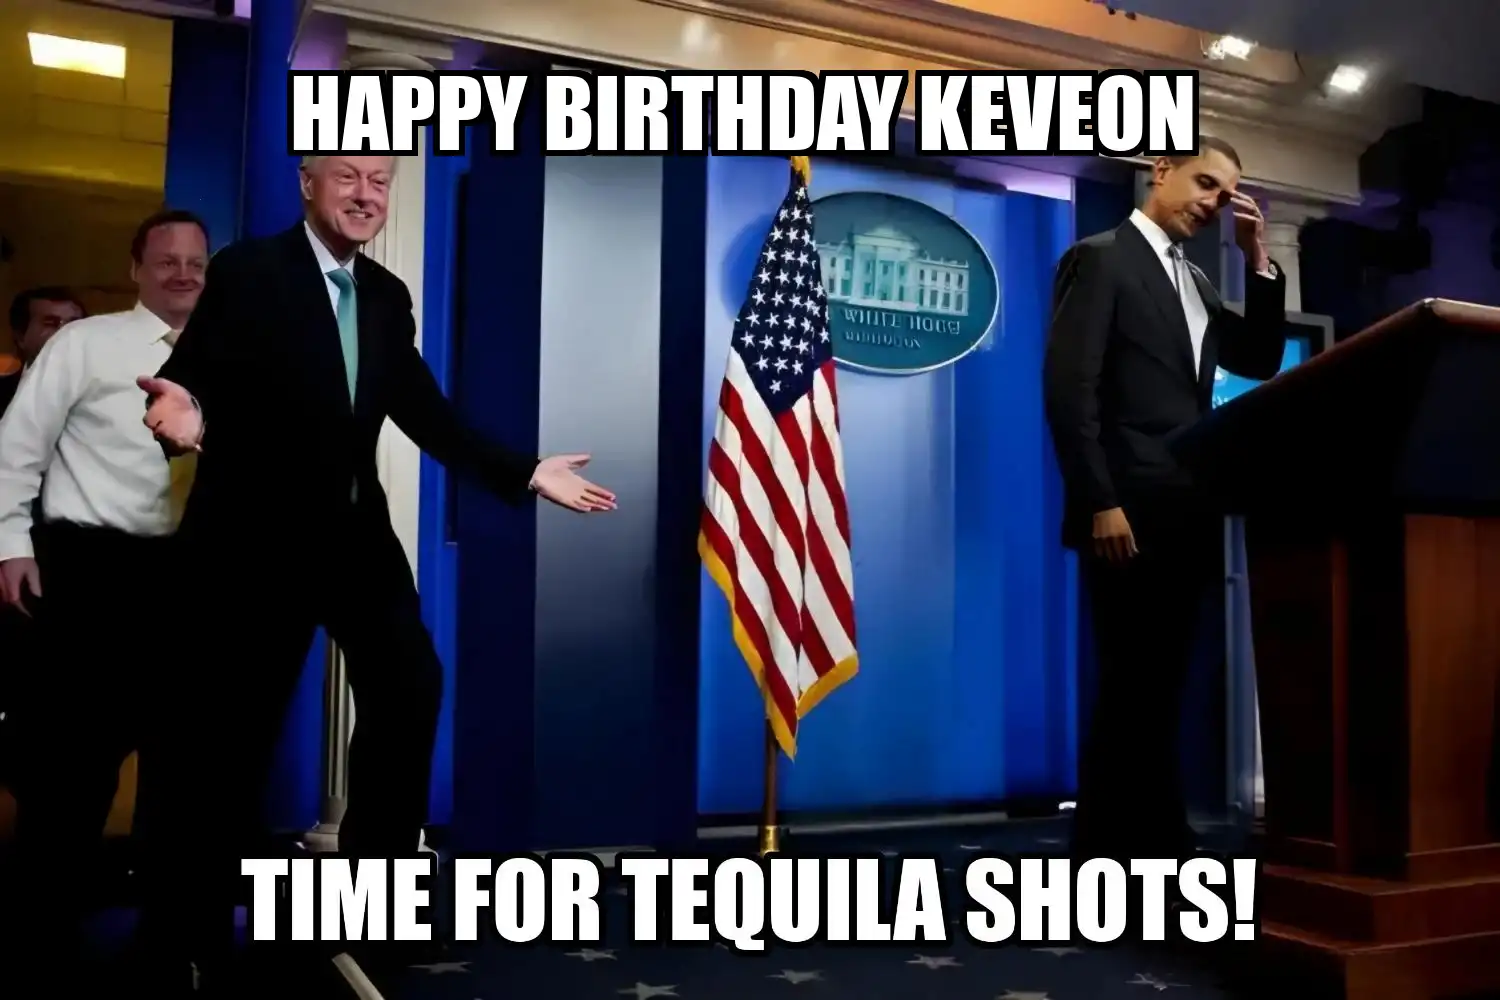 Happy Birthday Keveon Time For Tequila Shots Memes